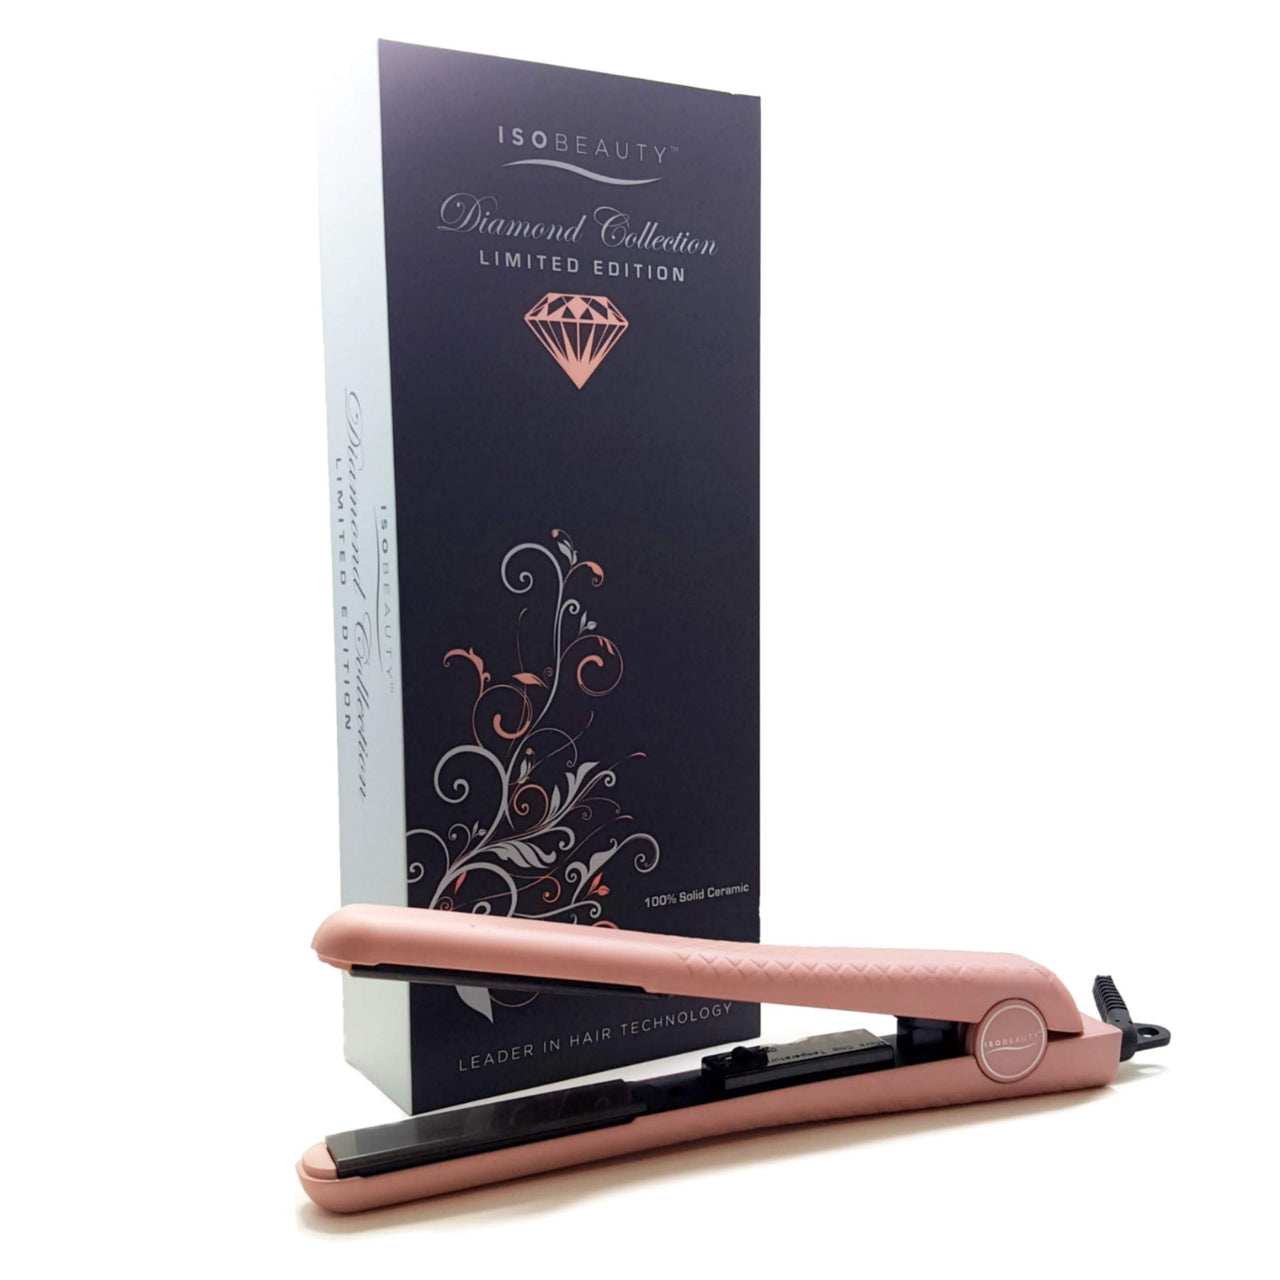 Soft Touch 1.25" Ceramic Plates Flat Iron Straightener with Adjustable Temperature Rose Gold